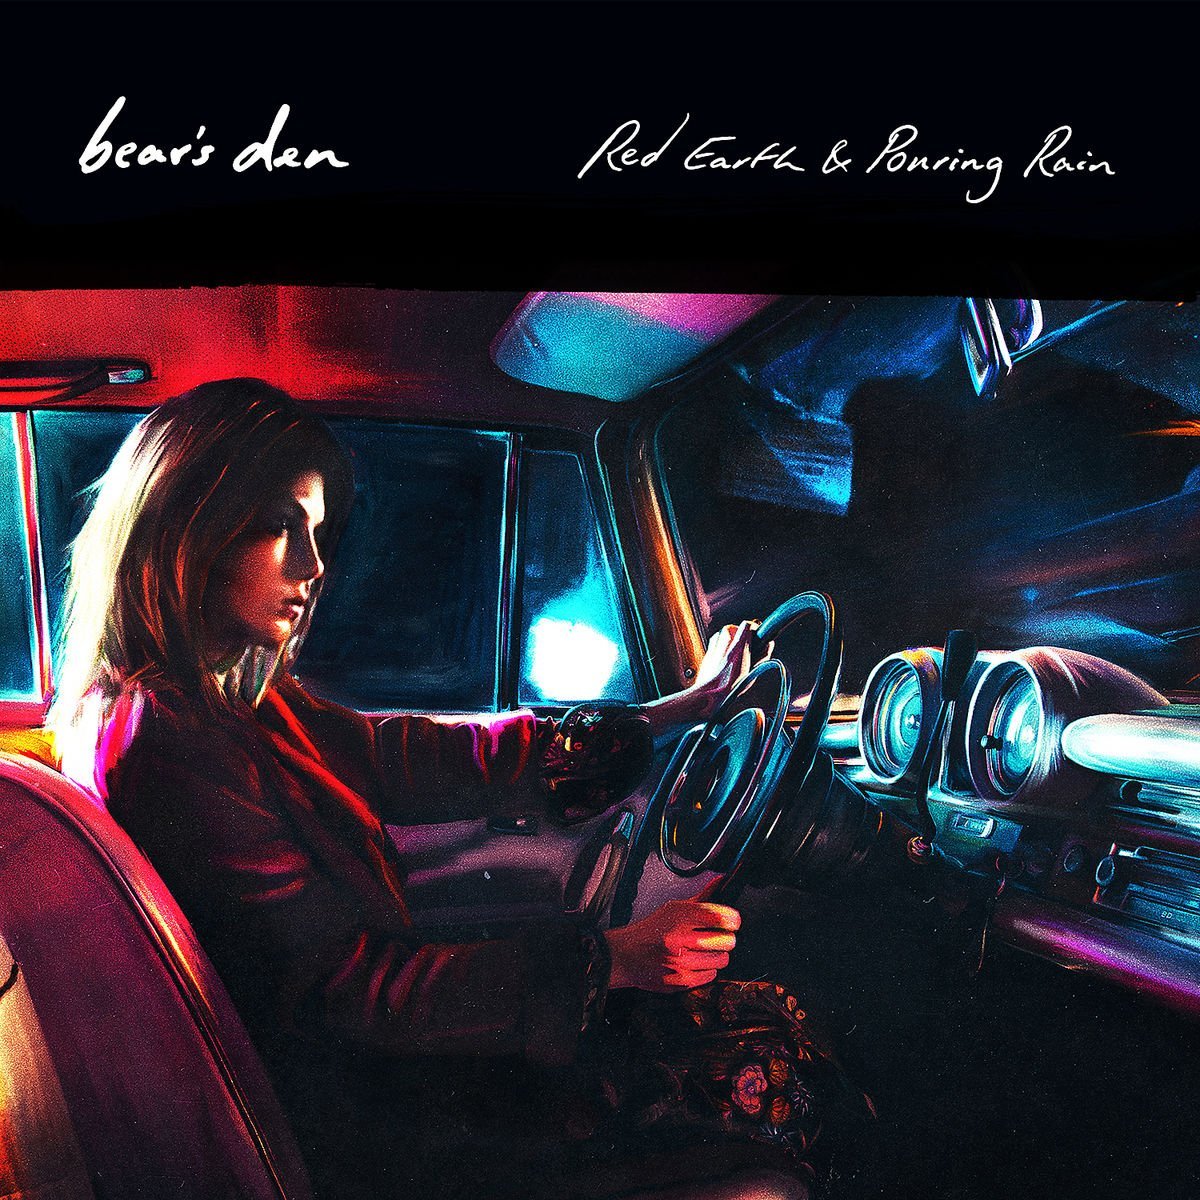 Red Earth And Pouring Rain By Bears Den Album Review